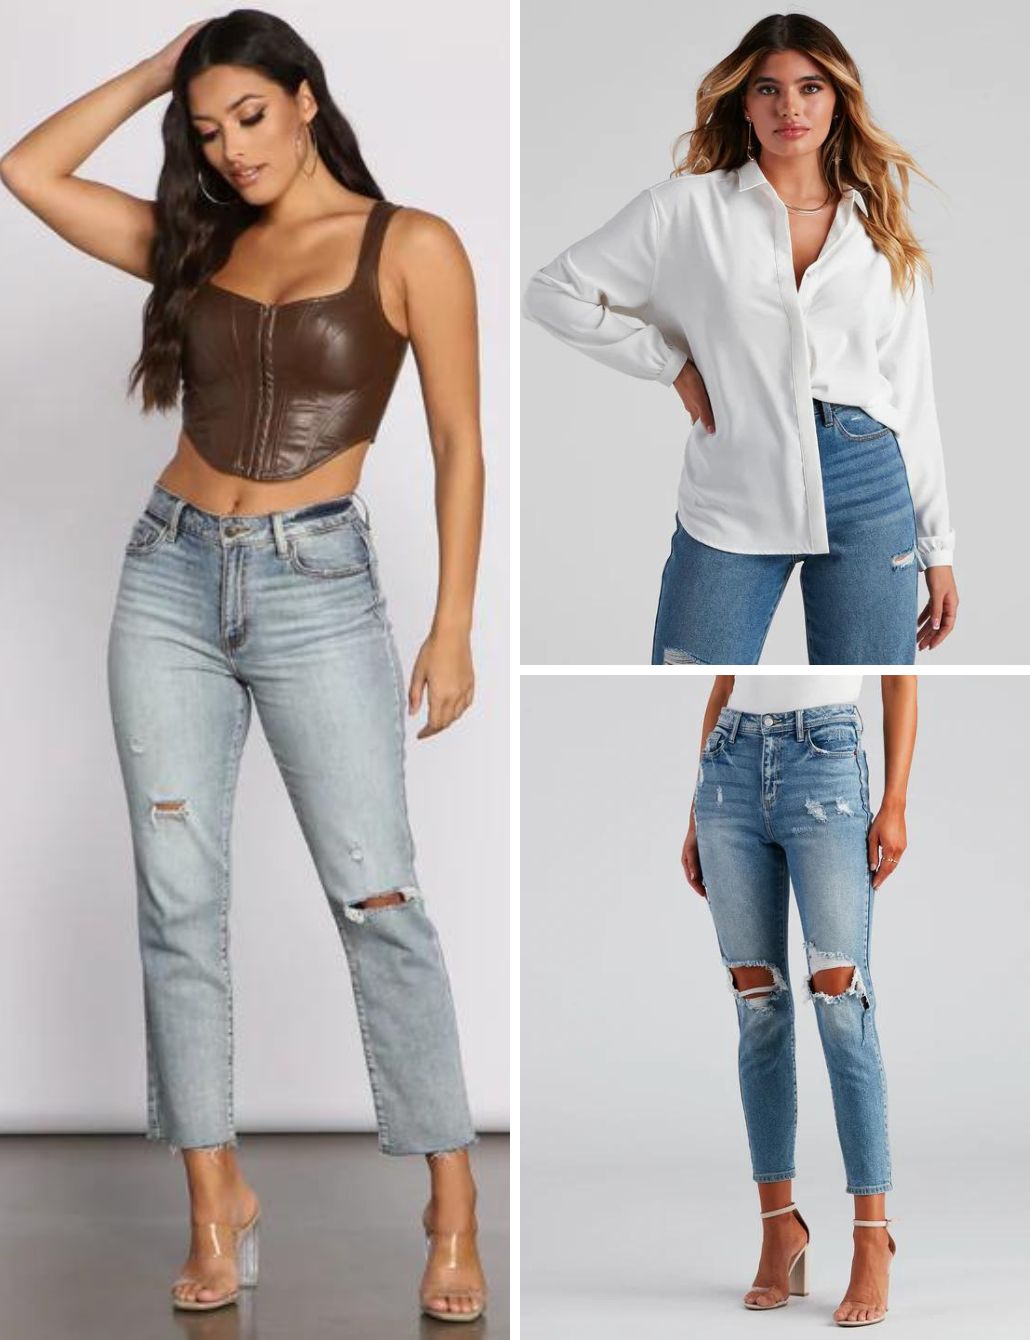 15+ Sizzling Outfit Ideas to Wear Over a Corset